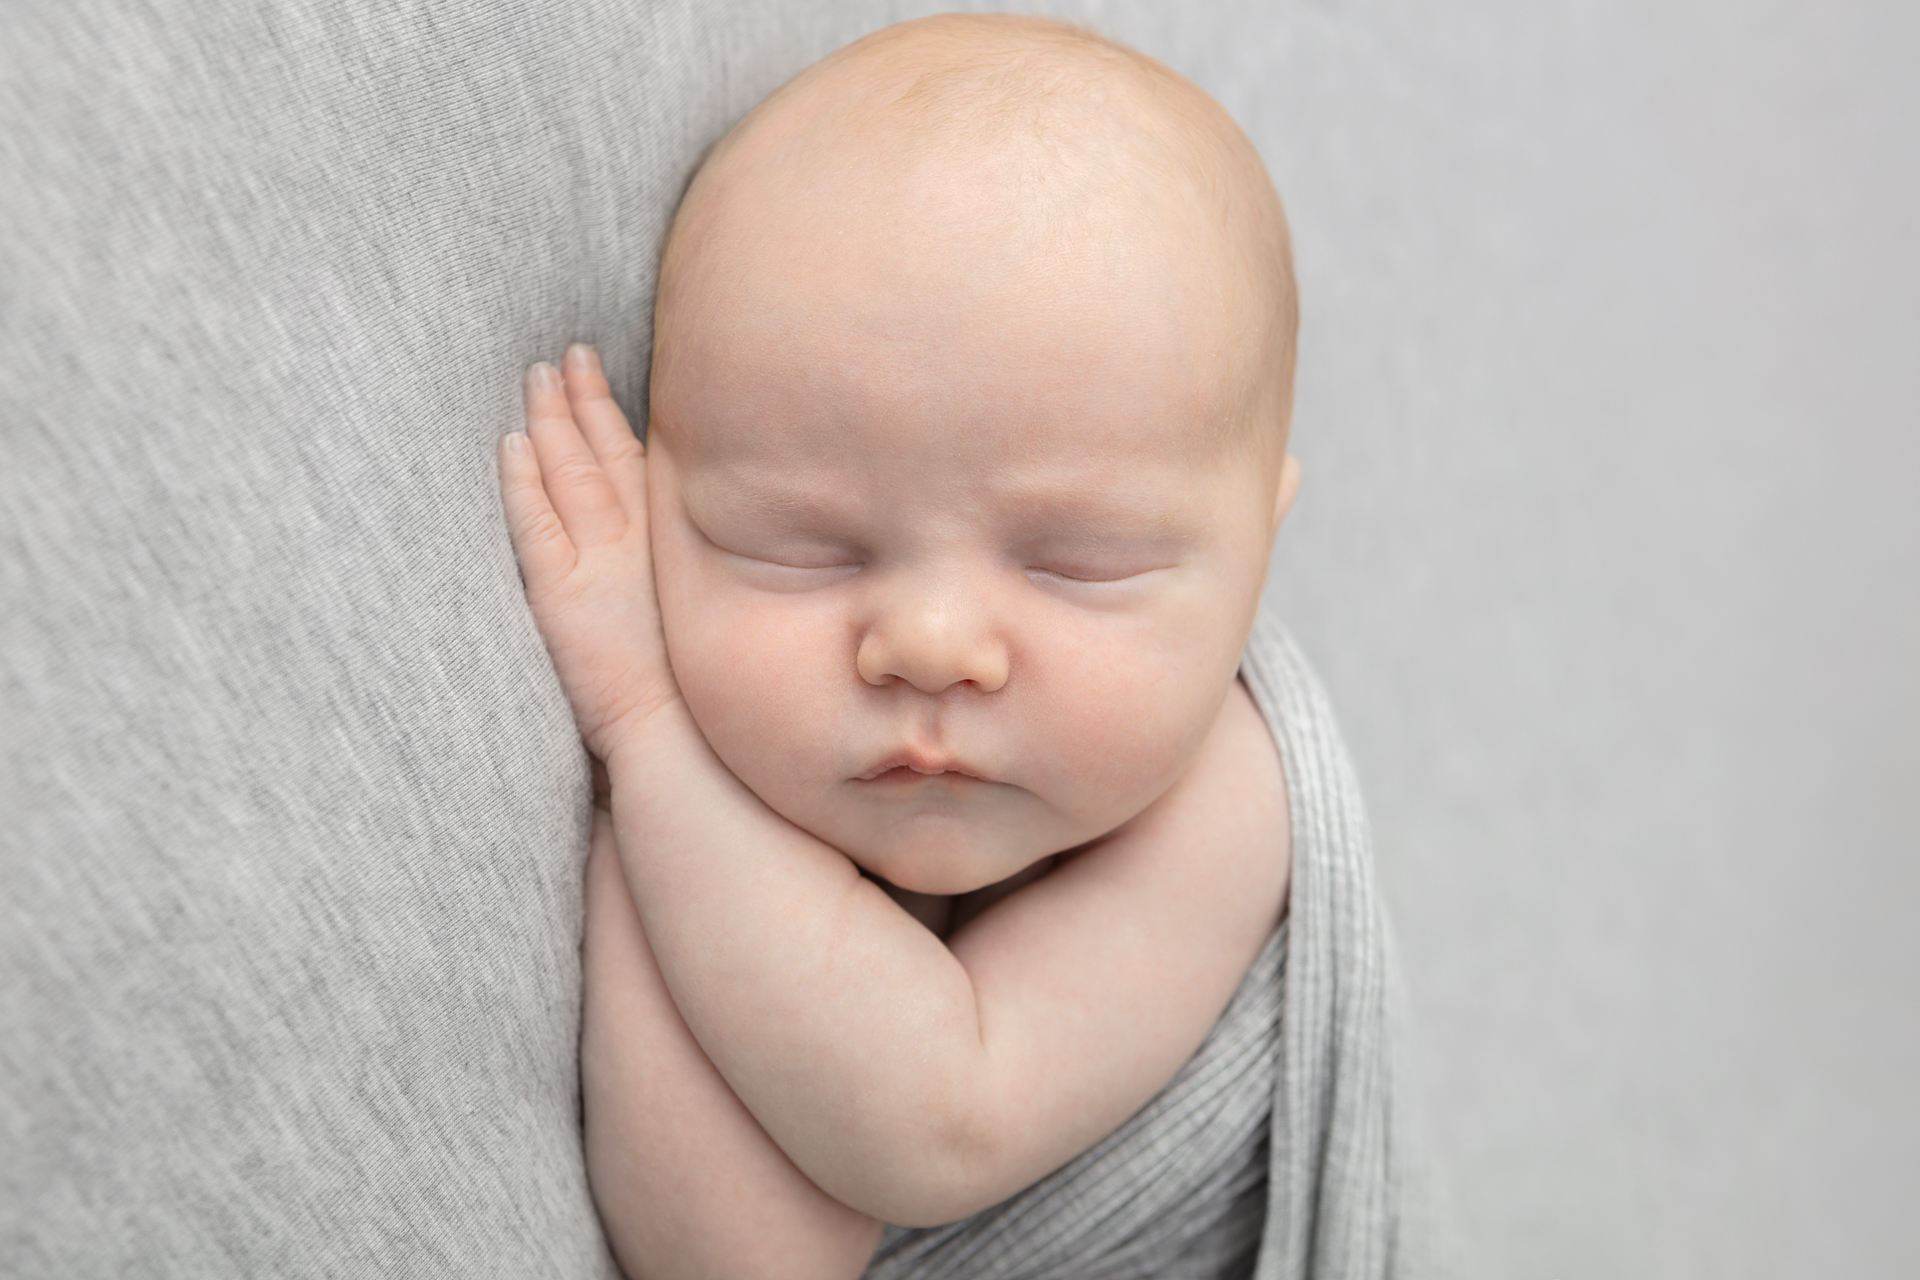 redhead newborn baby boy asleep on his hands; gray jersey backdrop; knit gray swaddle